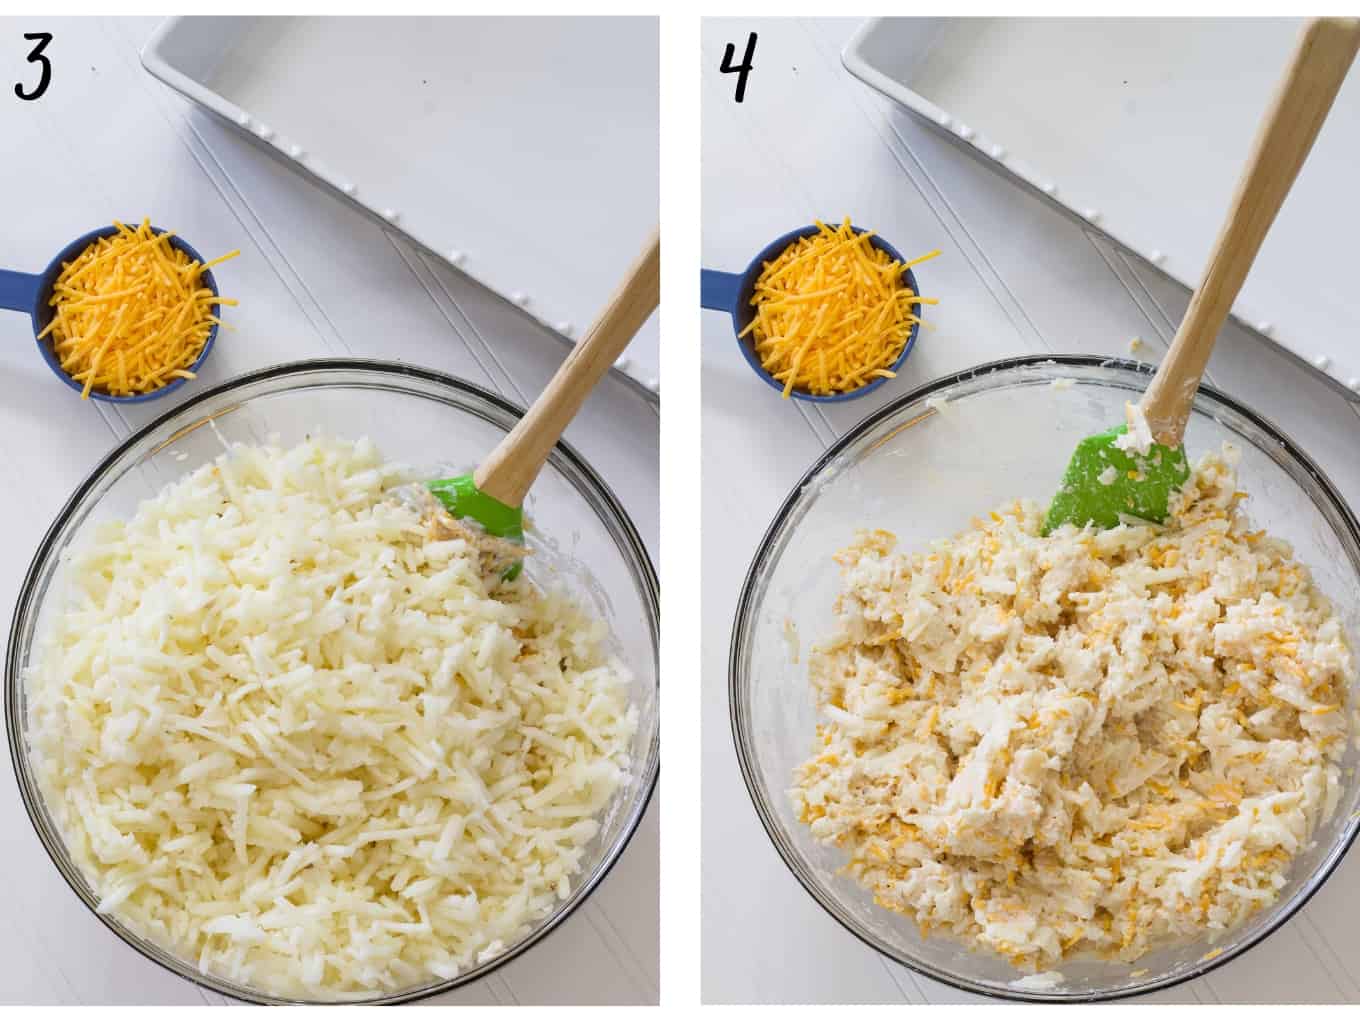 Side by side images of the mixing bowl with the potatoes added to the mixture, both unmixed and mixed.